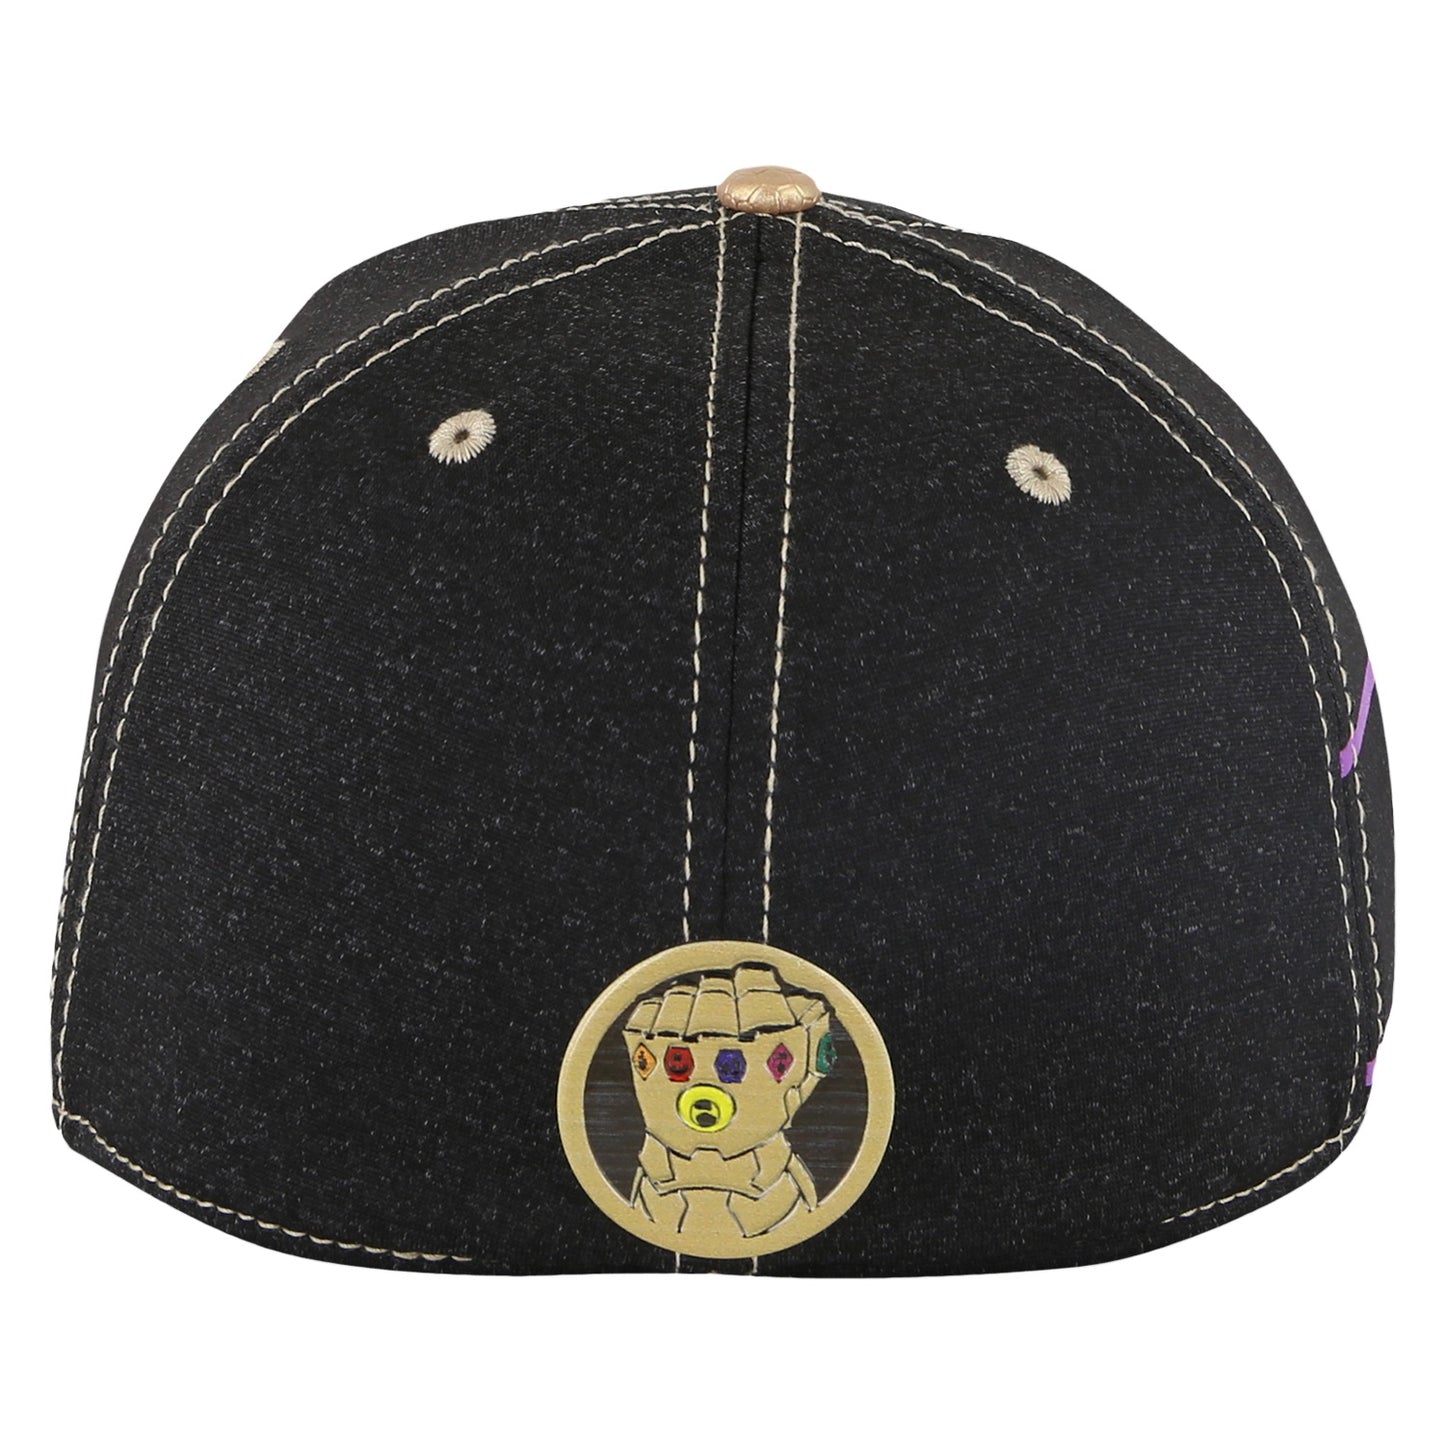 Thanos Baseball Cap in Gold and Black